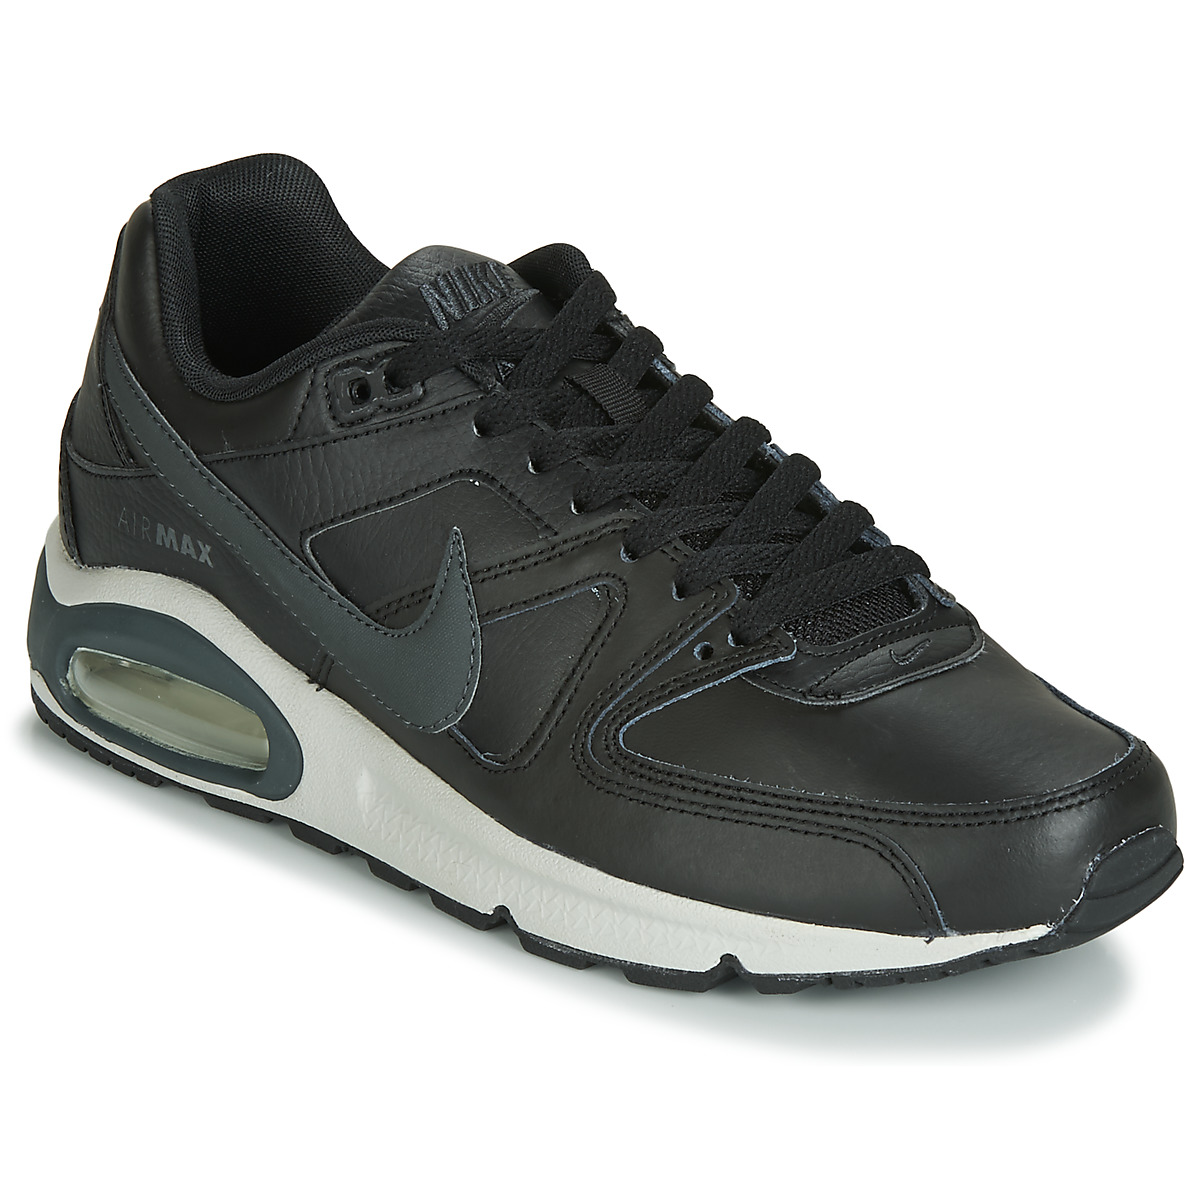 Seguro Vista Inseguro Nike AIR MAX COMMAND LEATHER Black - Free delivery | Spartoo NET ! - Shoes  Low top trainers Men USD/$141.50